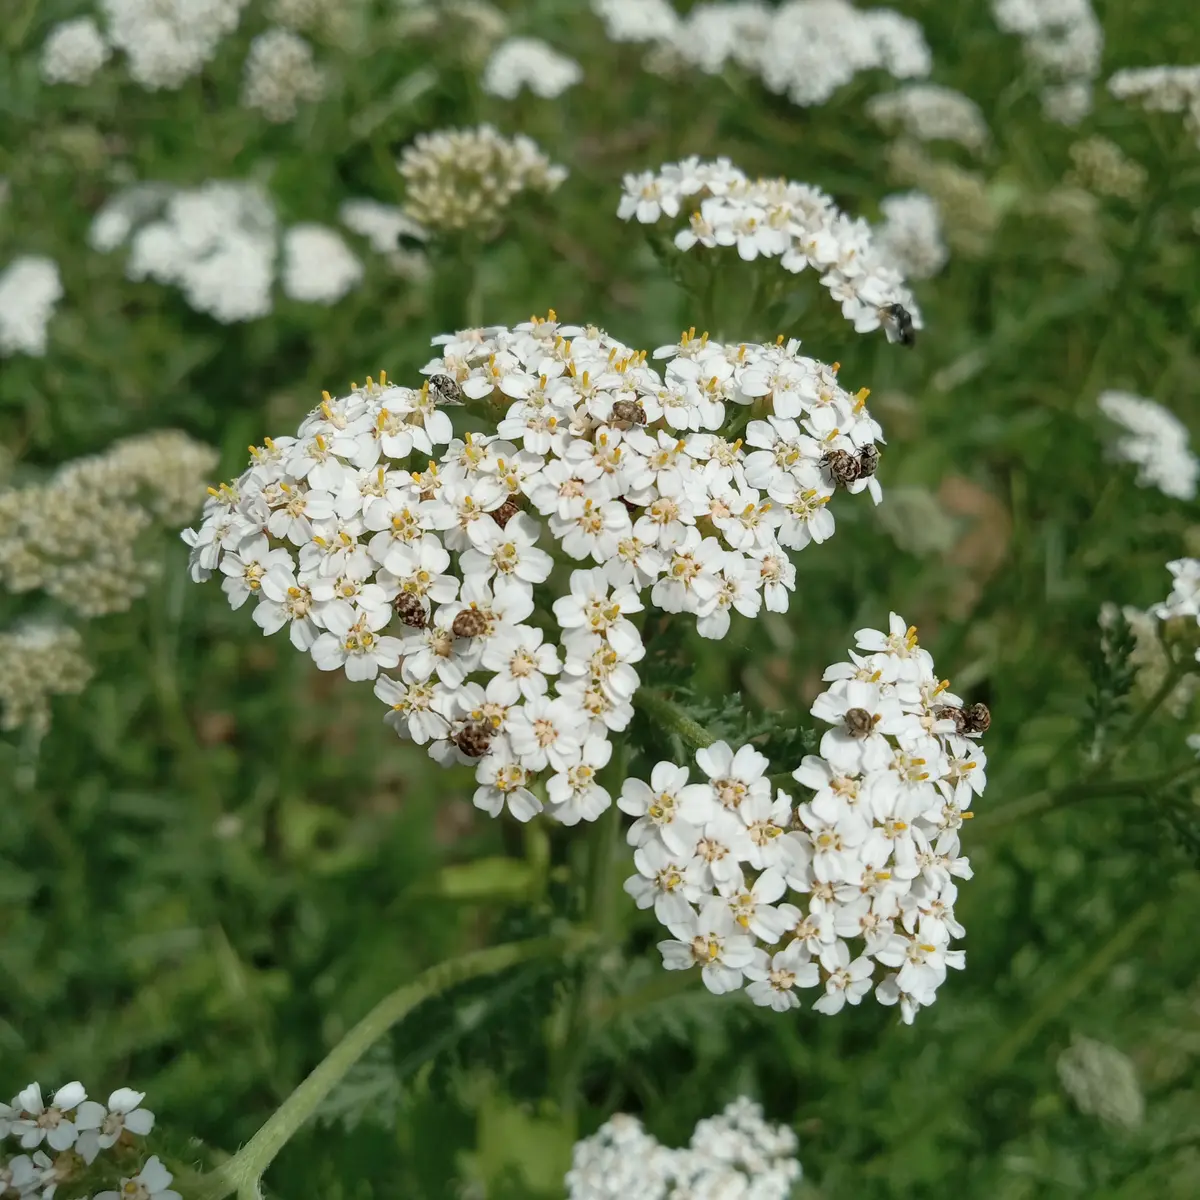 A colony of bloomiong common yarrows, with its many small white flowers, and some dozens of ladybugs and in the background, a fly.